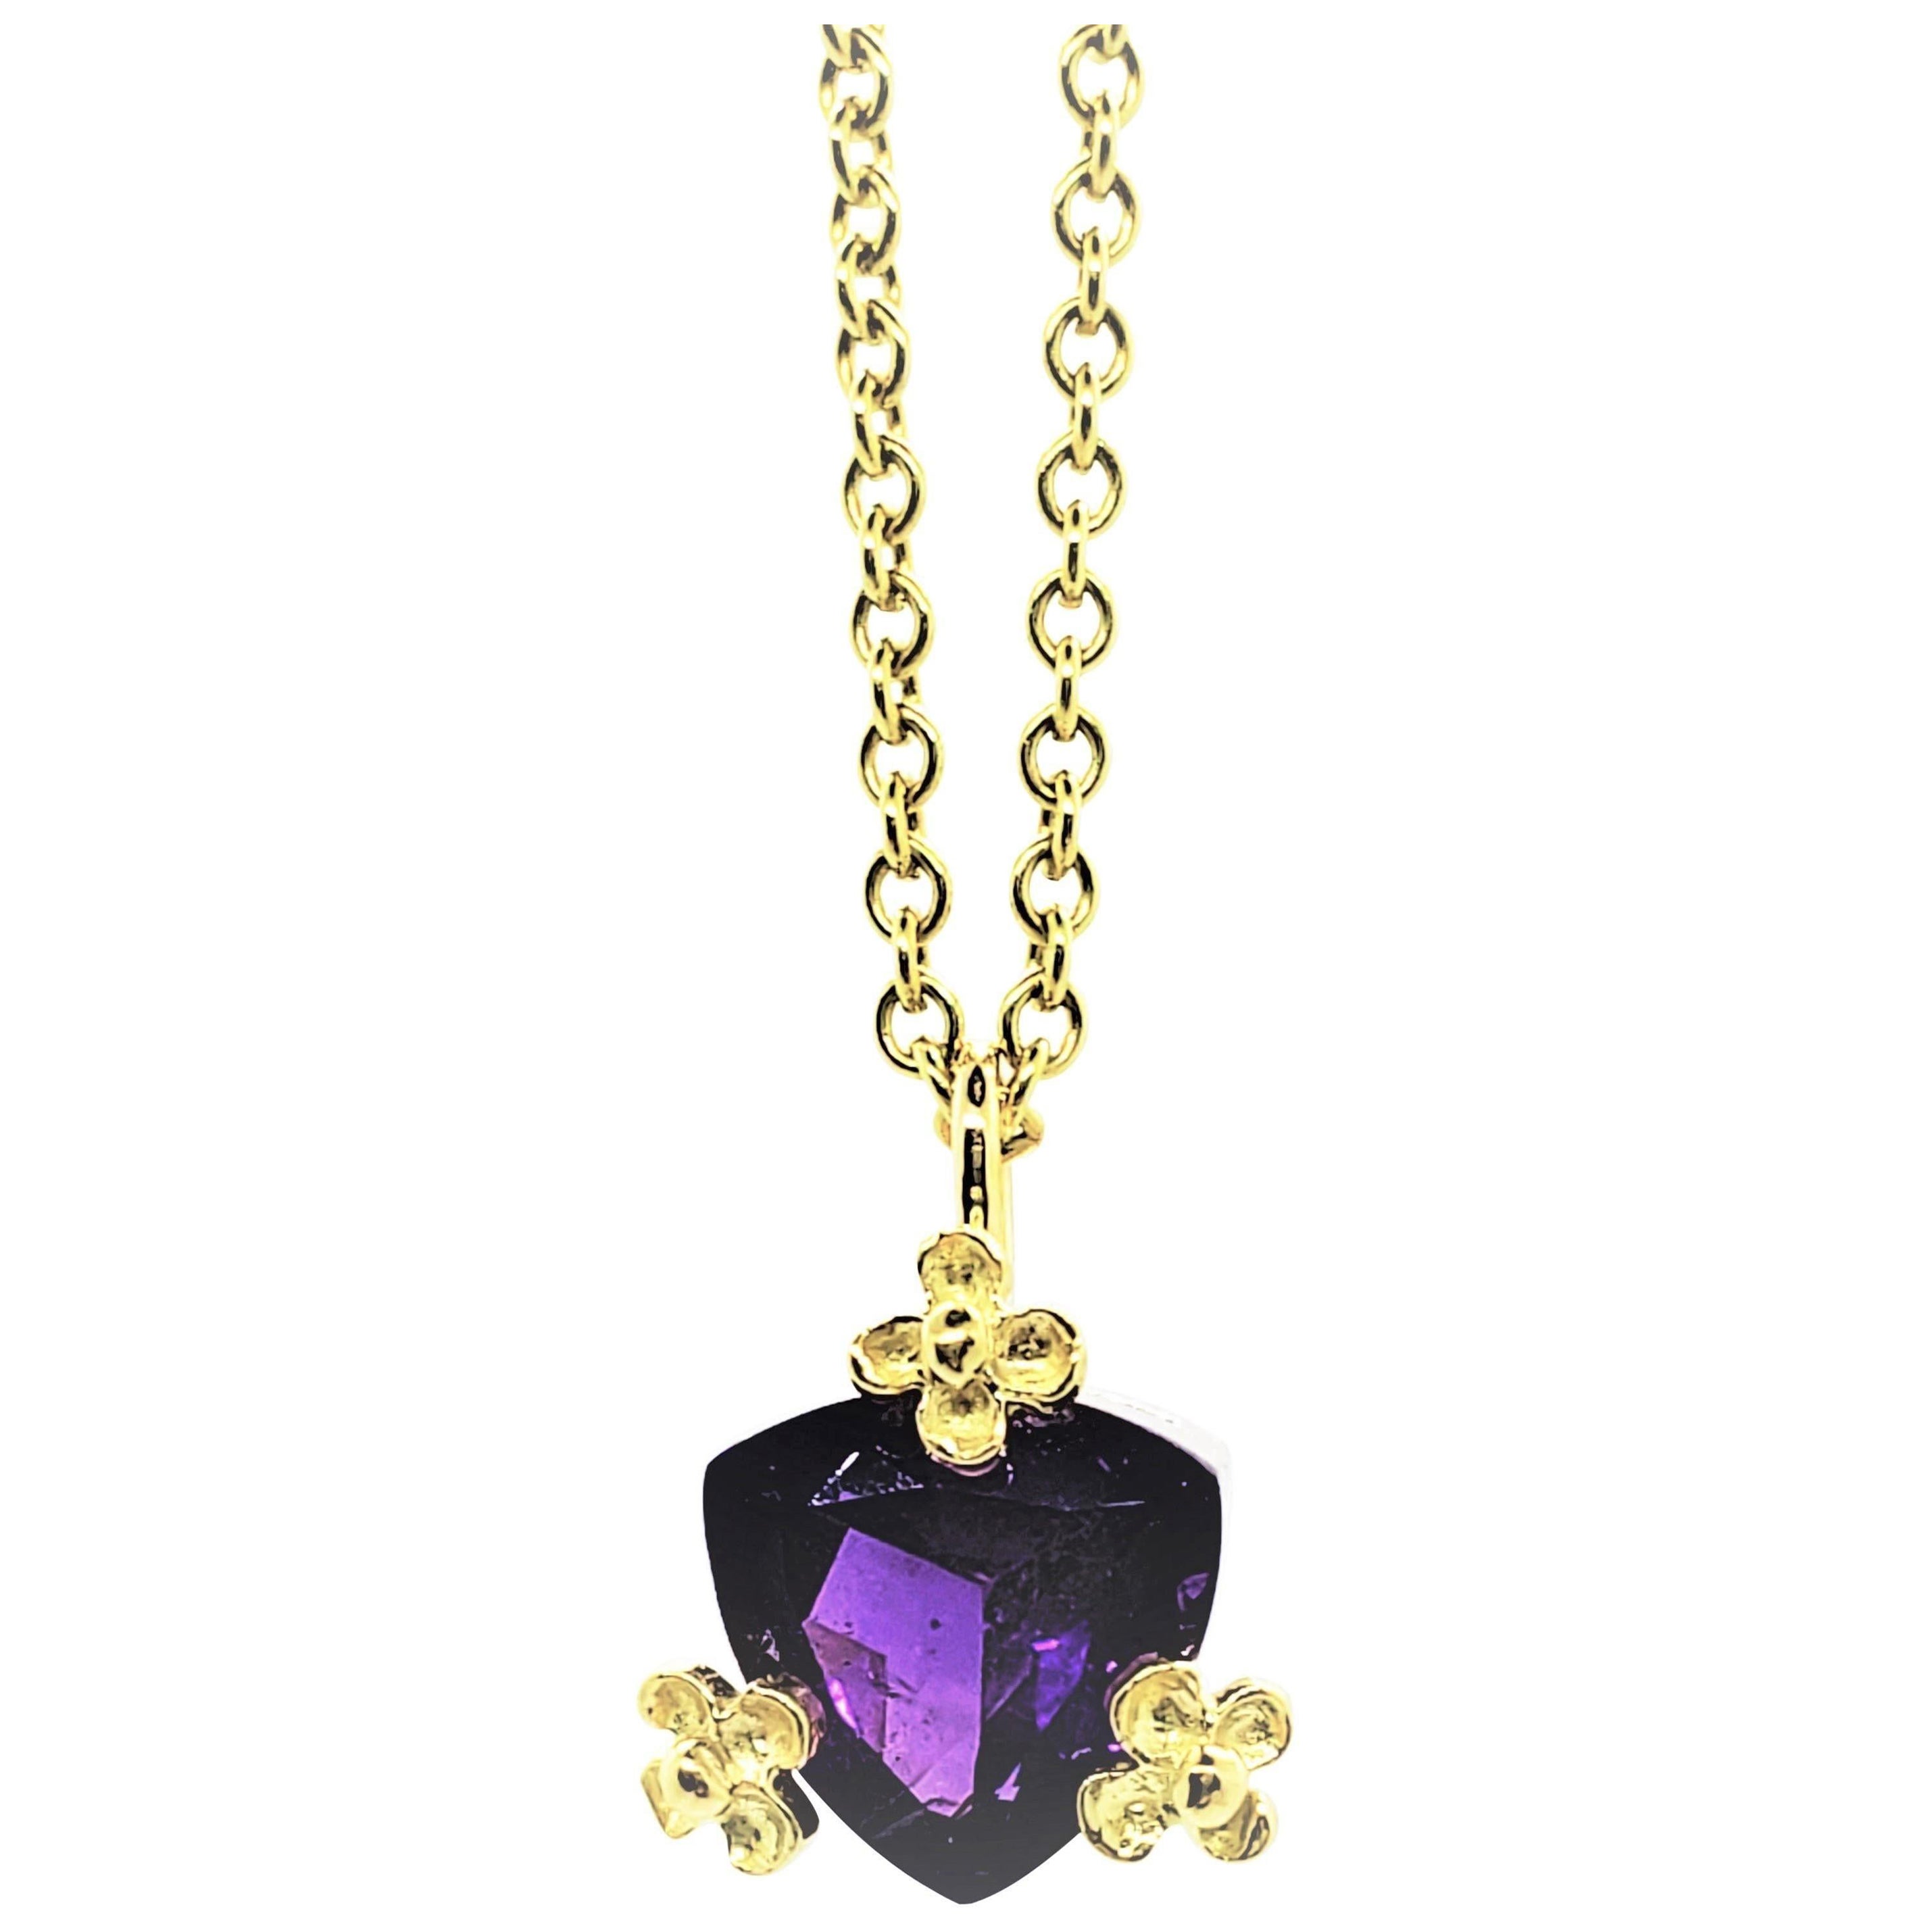 February Birthstone Amethyst Trillion Necklace in 14KY, 14KP, 18KY Petal Prongs